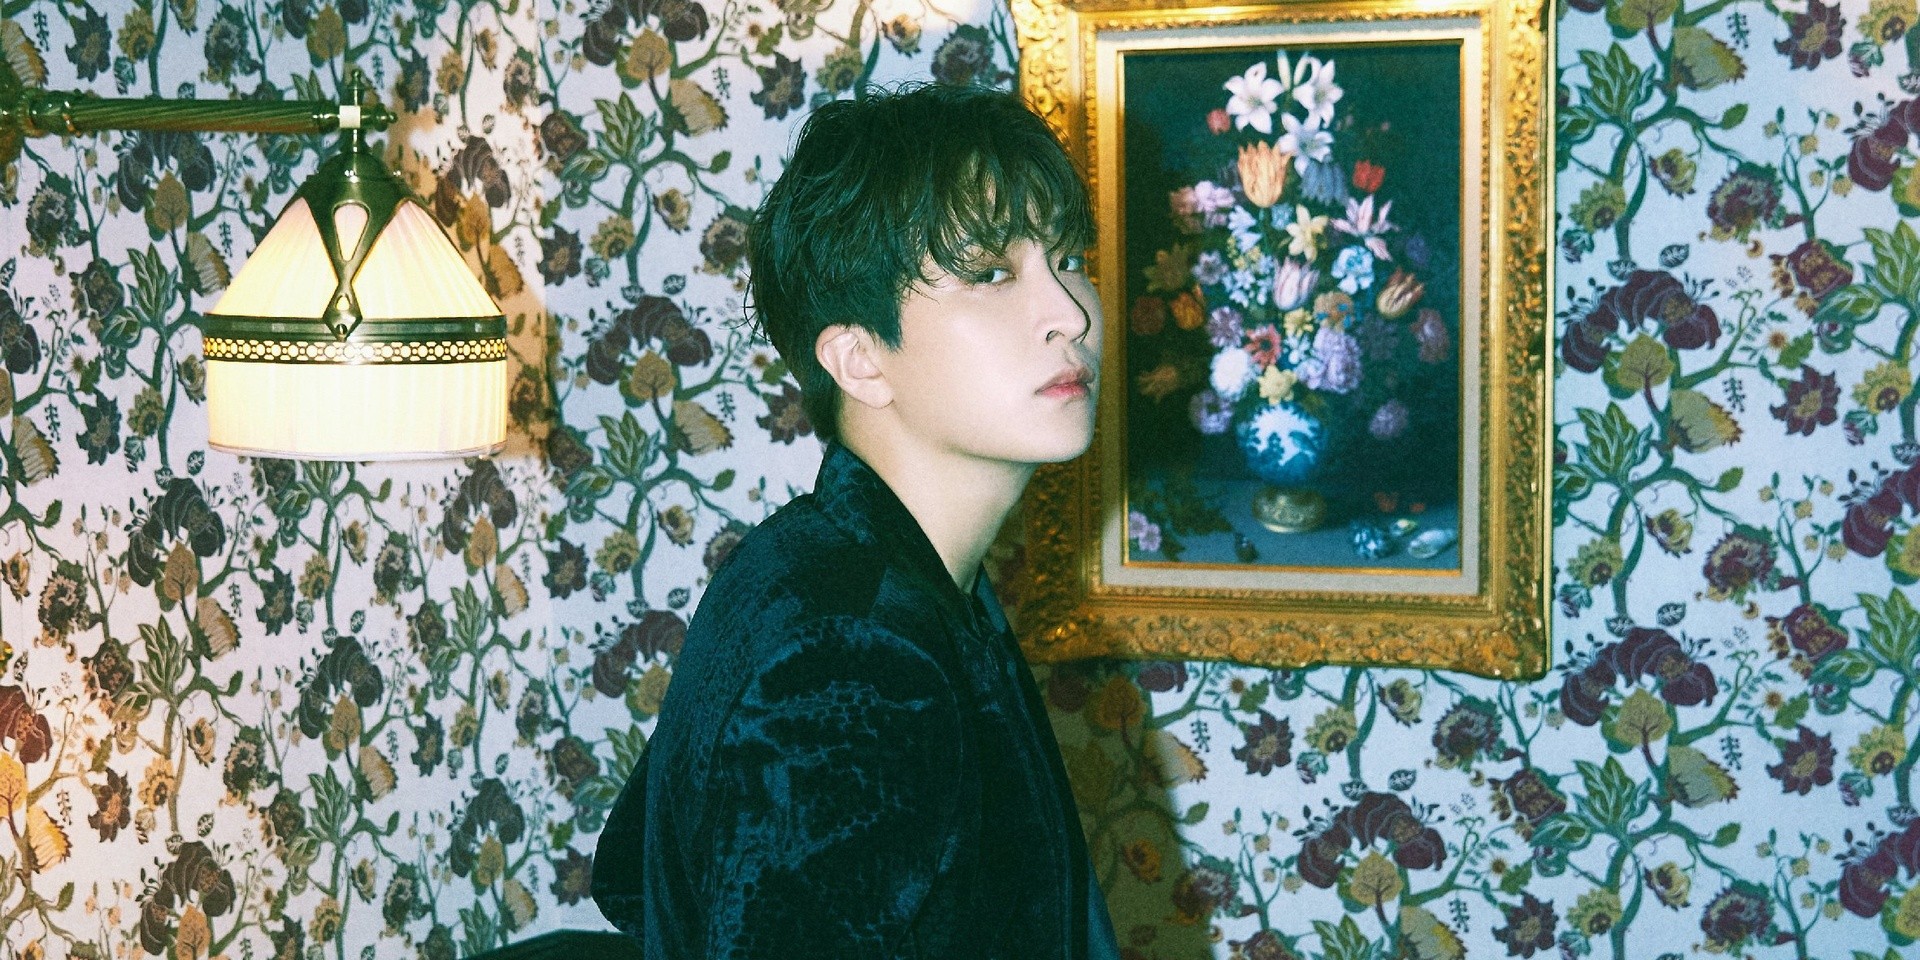 GOT7's Youngjae gets sweet and sentimental with new mini-album 'SUGAR' — listen